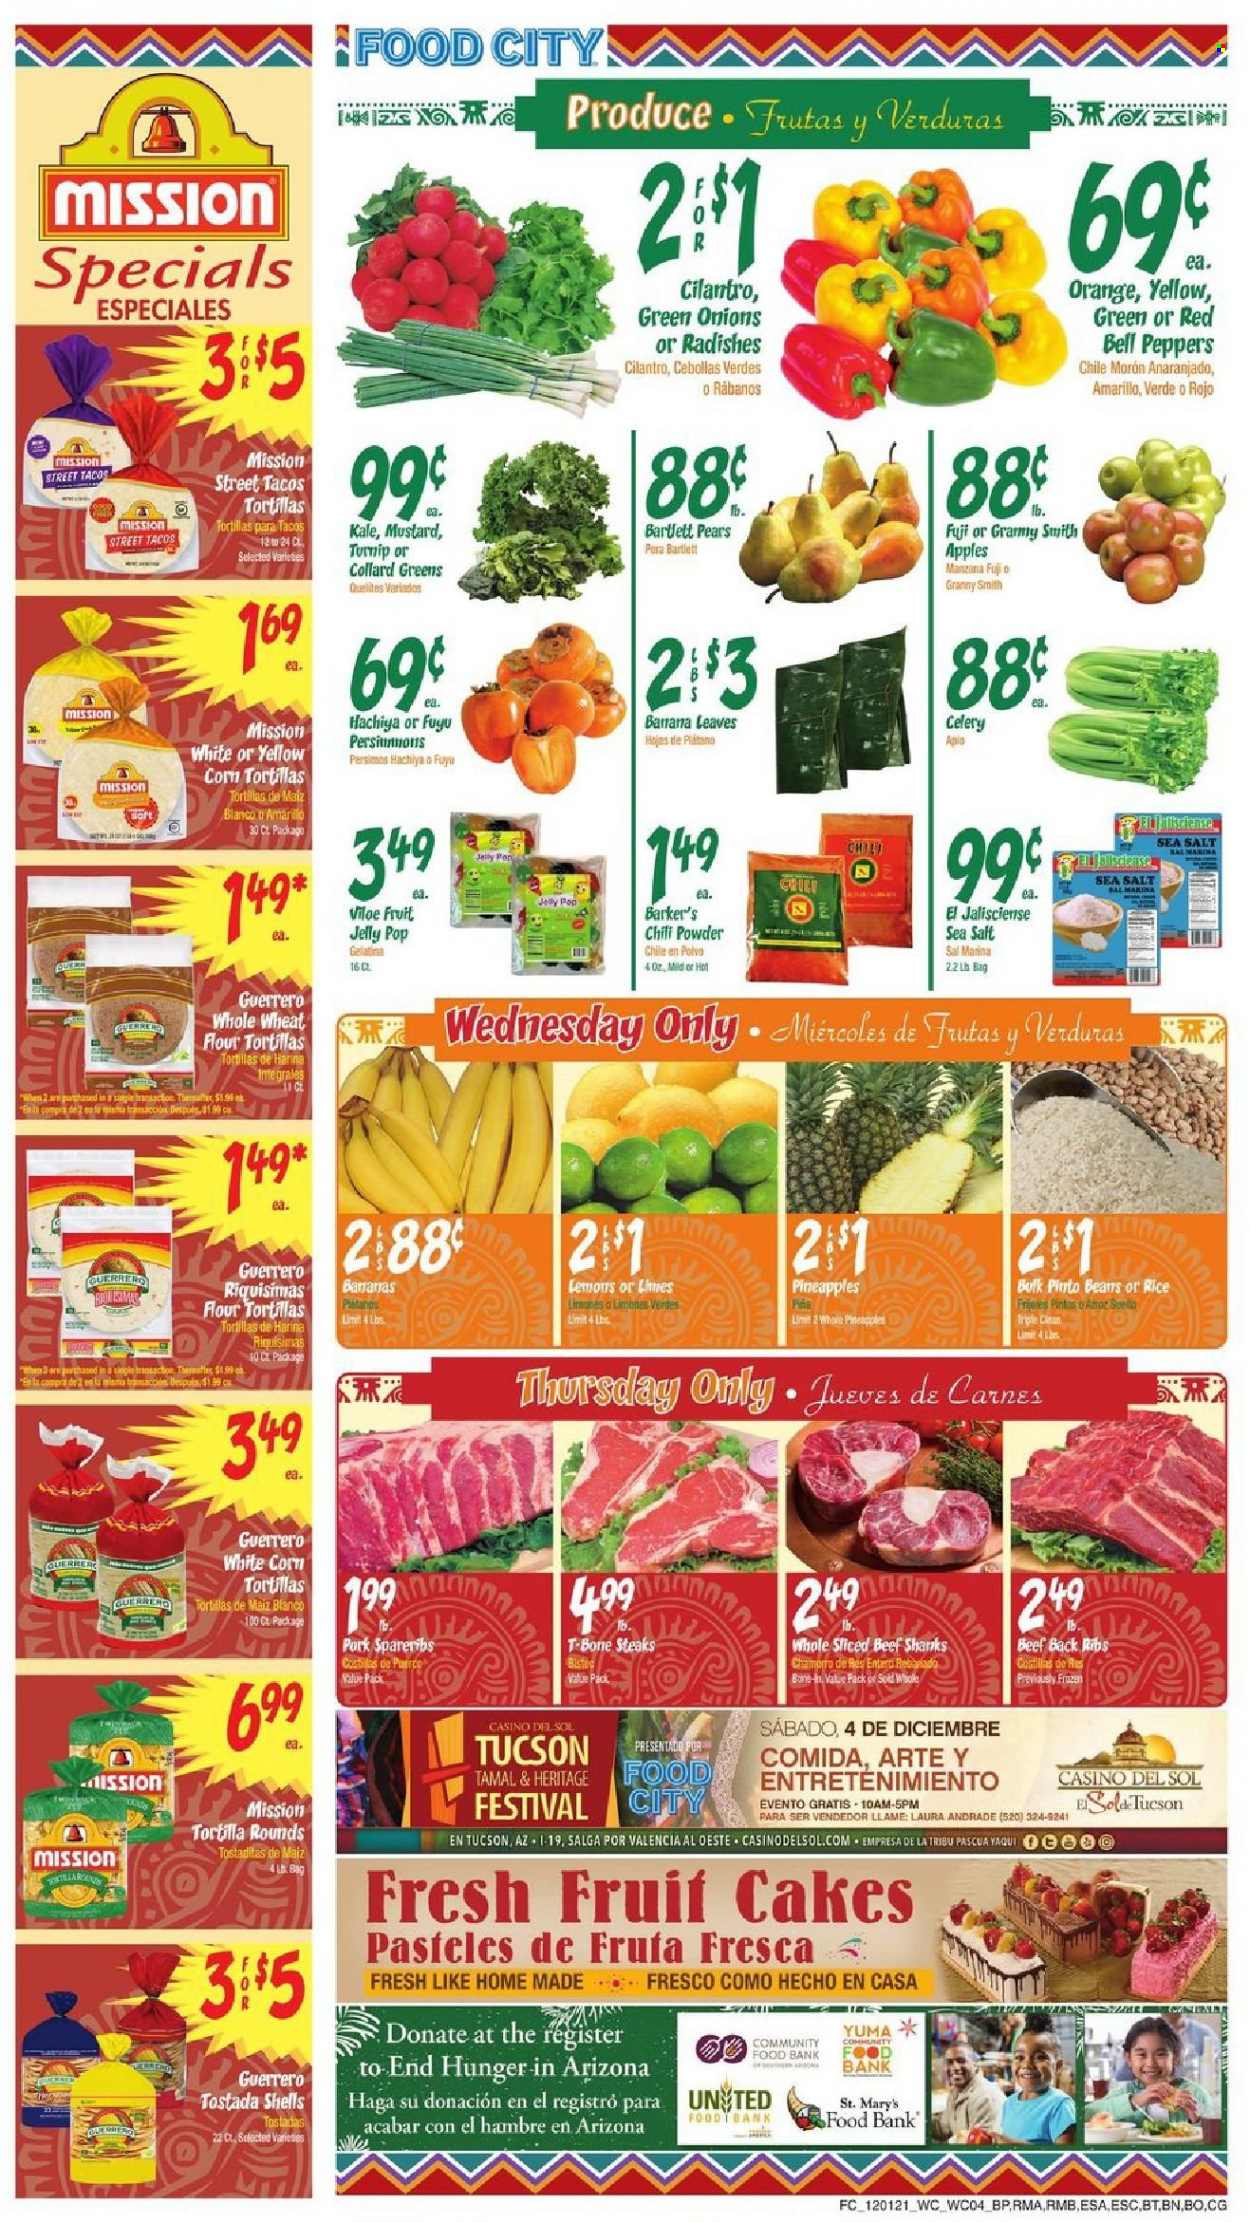 thumbnail - Food City Flyer - 12/01/2021 - 12/07/2021 - Sales products - Bartlett pears, tortillas, flour tortillas, bell peppers, celery, collard greens, radishes, kale, peppers, green onion, apples, bananas, pineapple, pears, Granny Smith, jelly, wheat flour, whole wheat flour, sea salt, rice, cilantro, mustard, beef meat, t-bone steak, steak, pork spare ribs. Page 4.